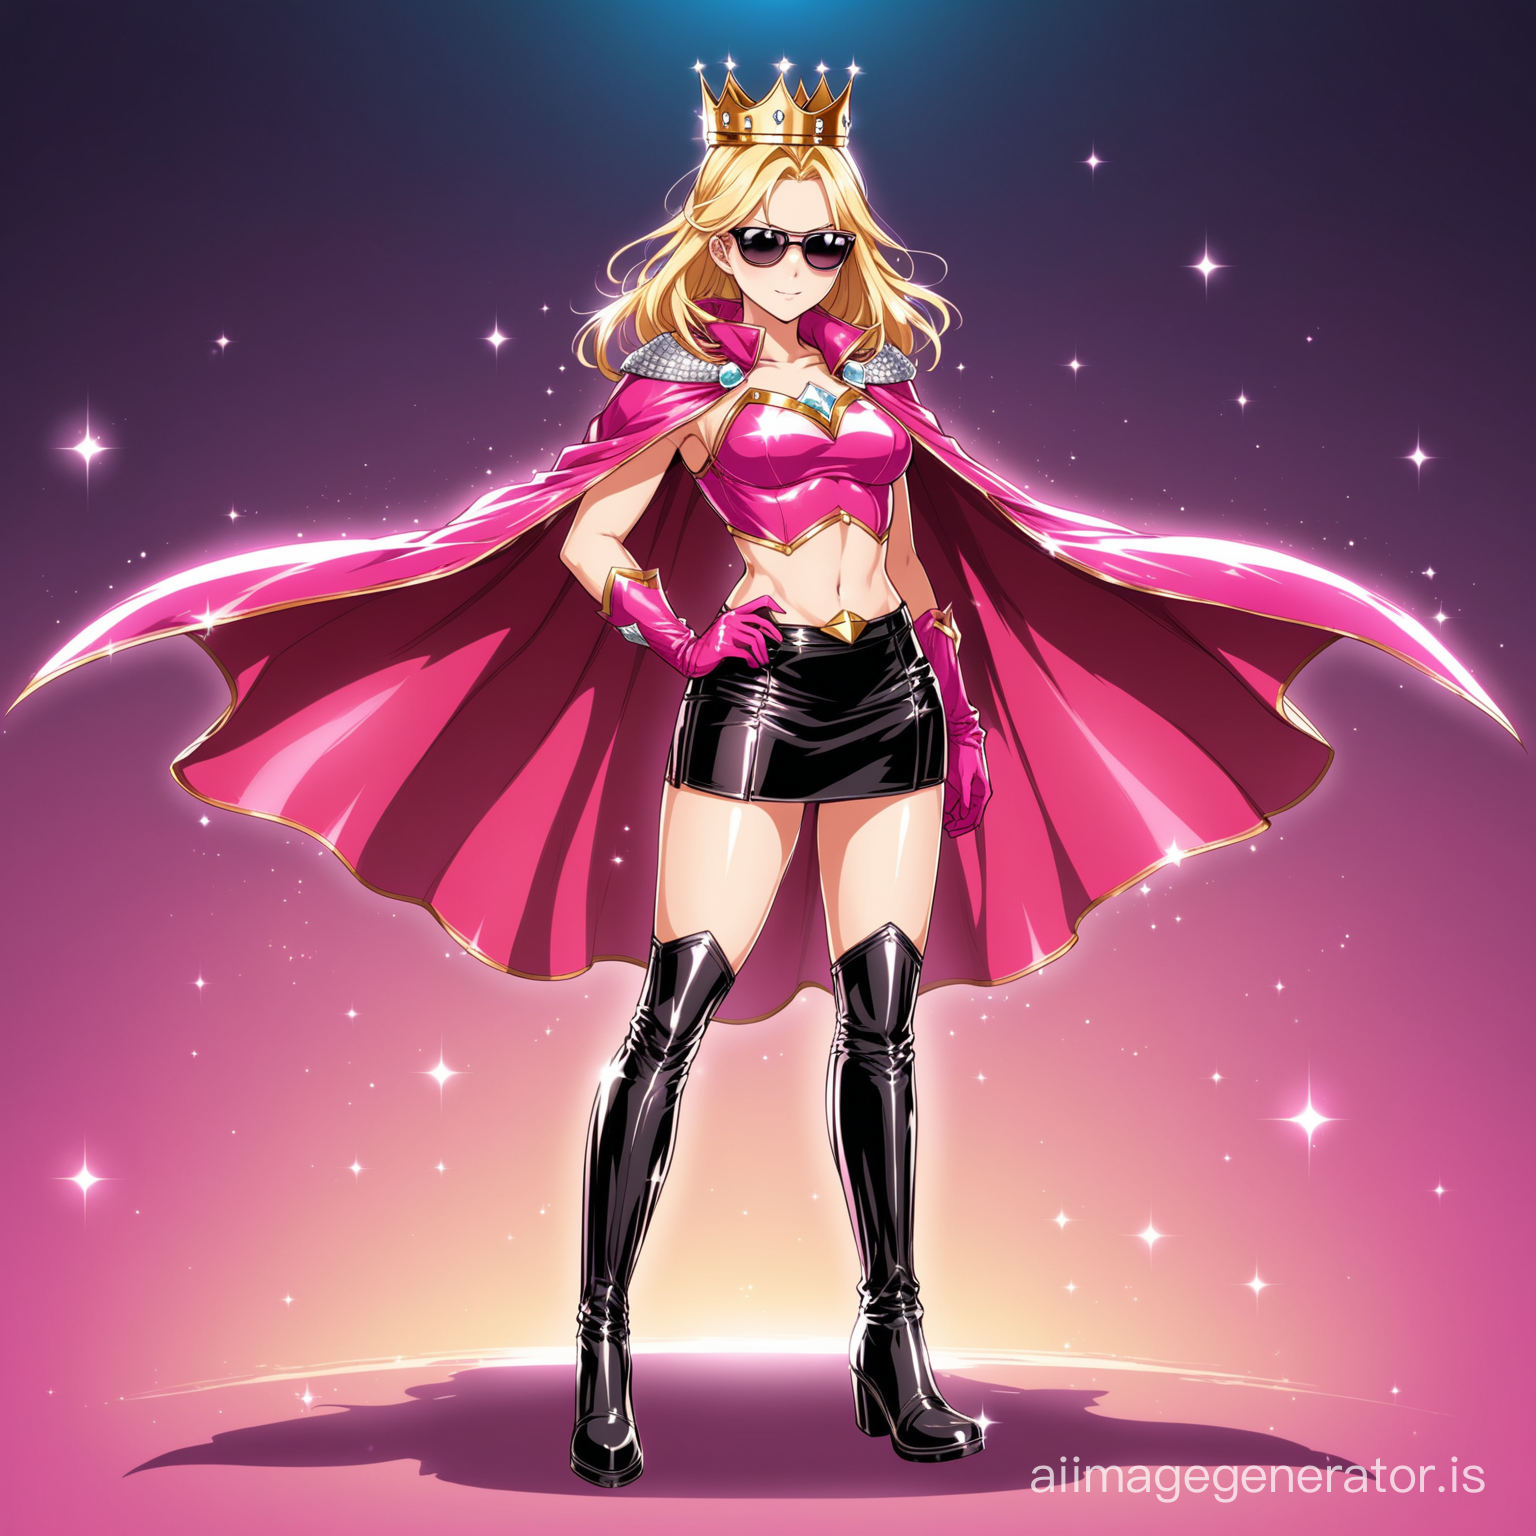 hot blonde anime girl in a pink superhero costume wearing a hot leather skirt, a cute croptop,  
a cape on her shoulder region and a pair of leather boots, gloves and a pair of cool shades. she looks royal and wears a crown embeded with diamonds
she gives a hot pose with her hands kept behind her back